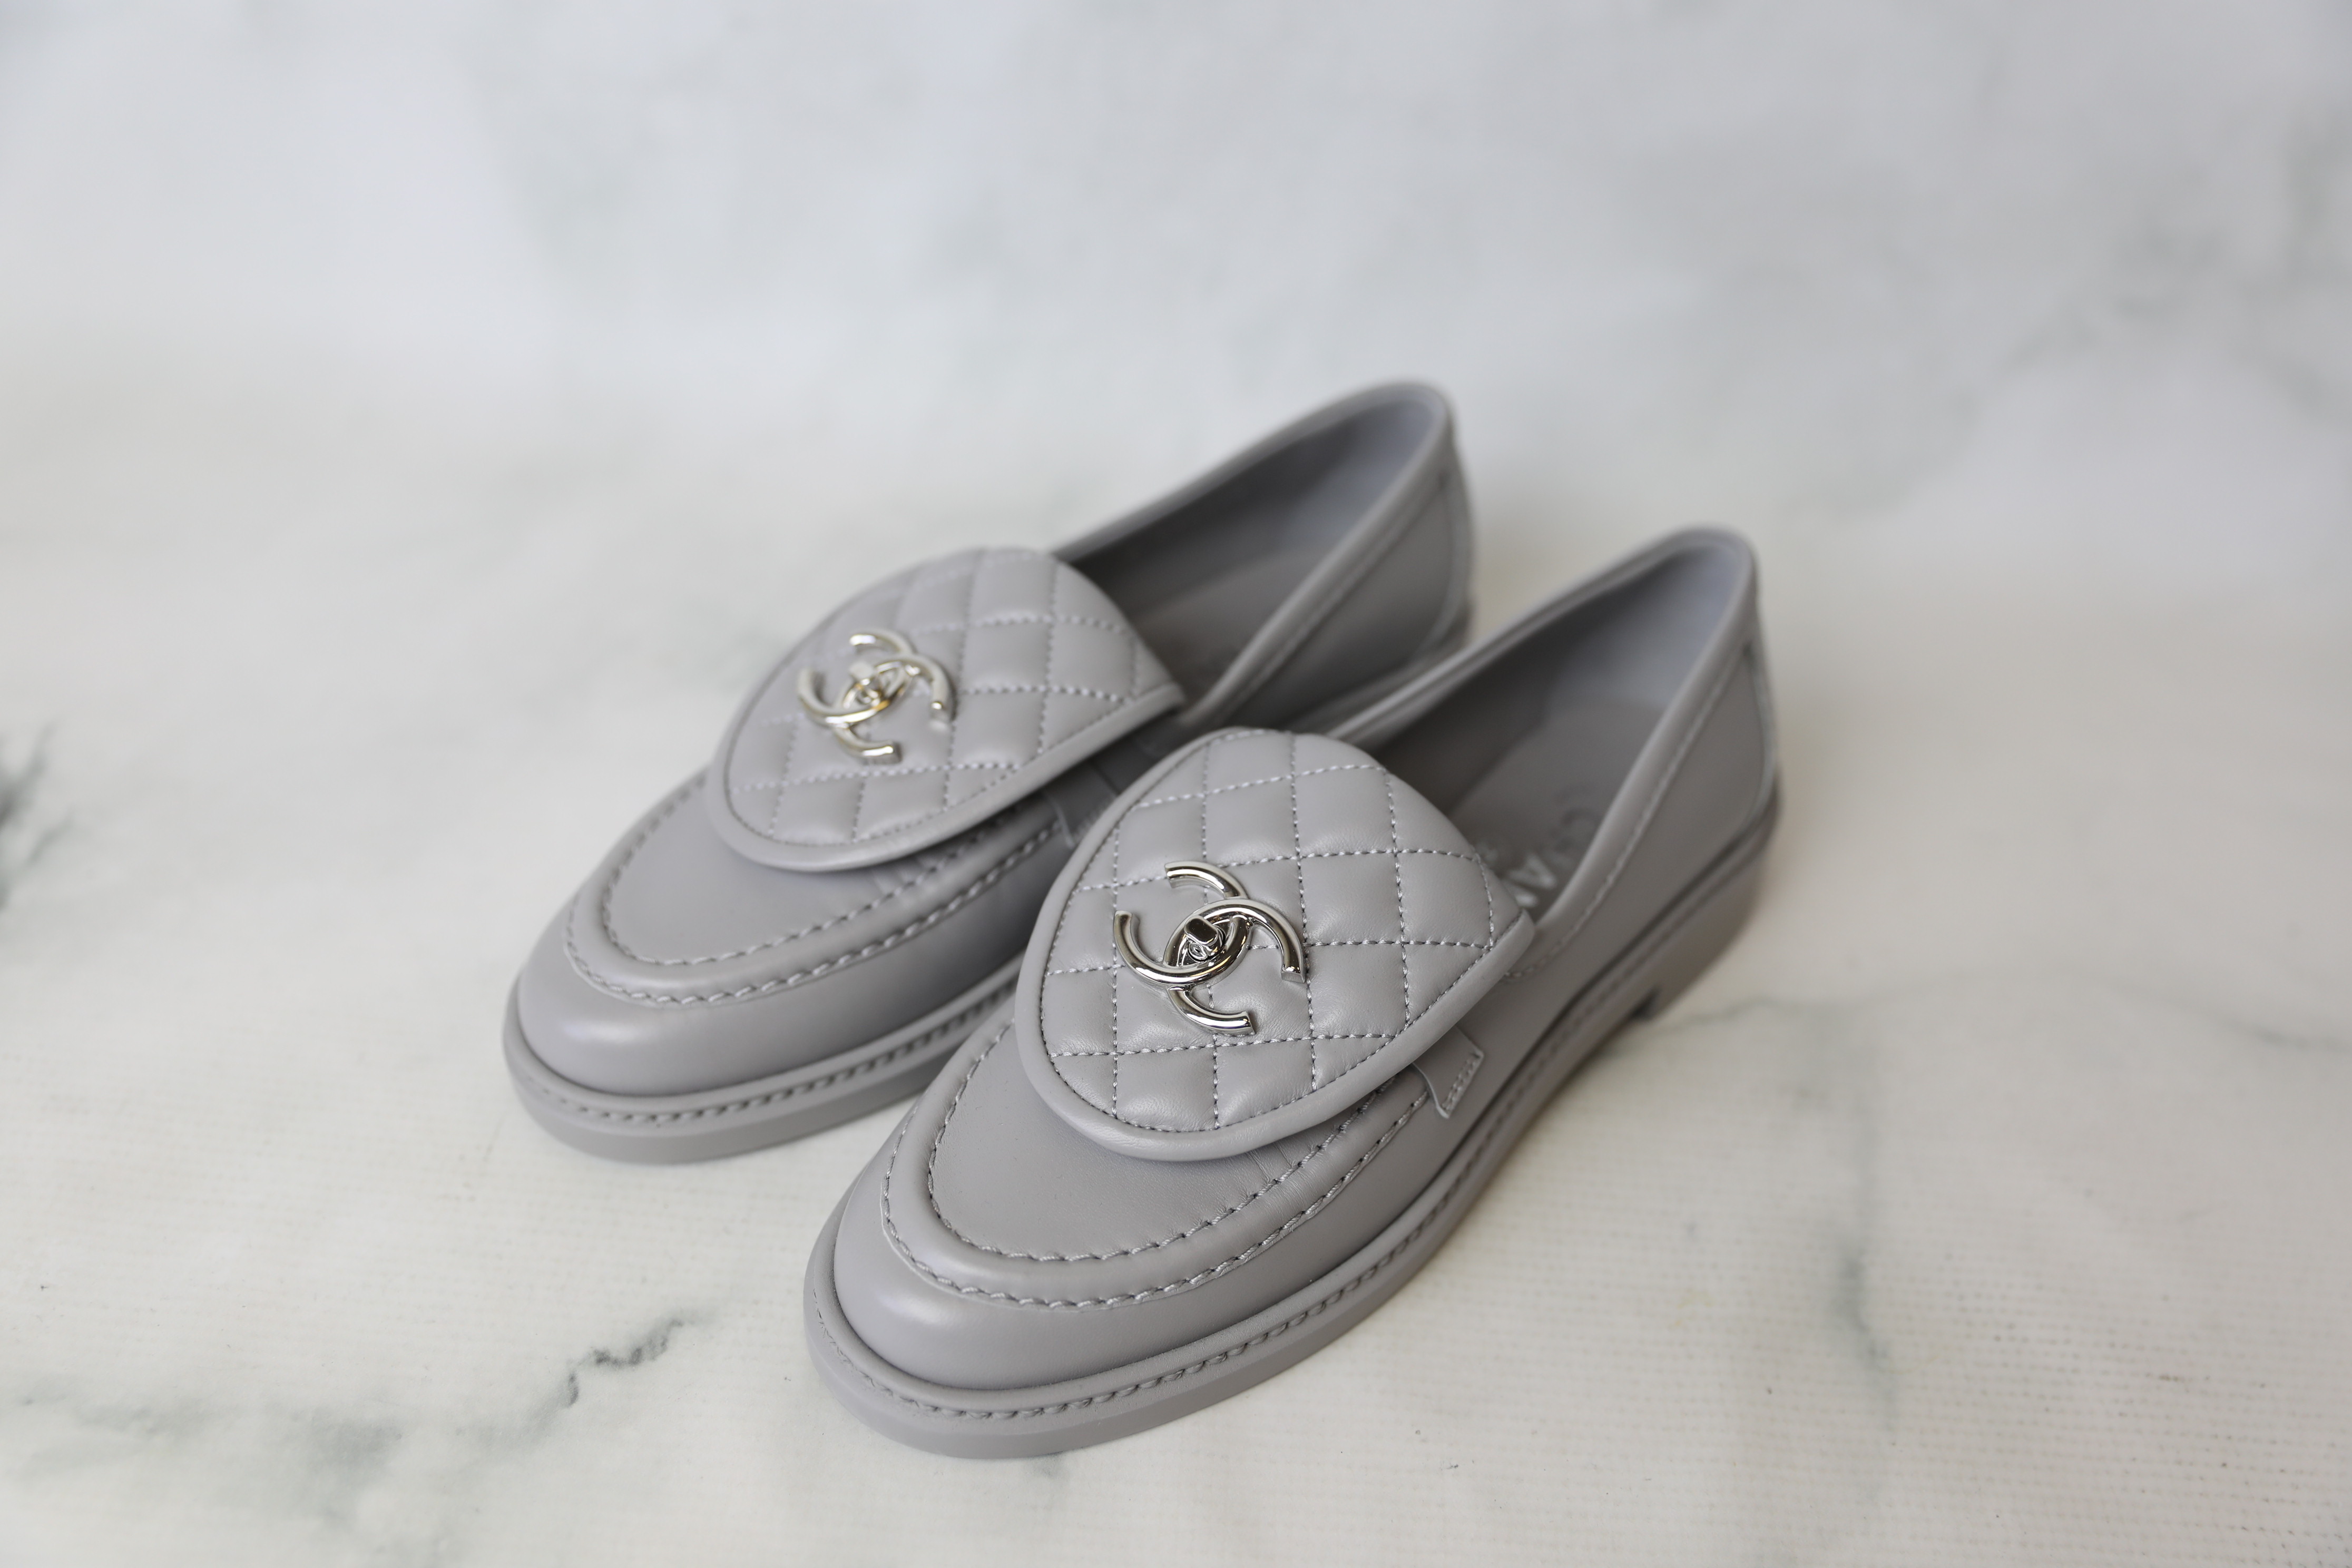 Chanel Shoes Turnlock Loafers, Biege, Size 40, New in Box WA001